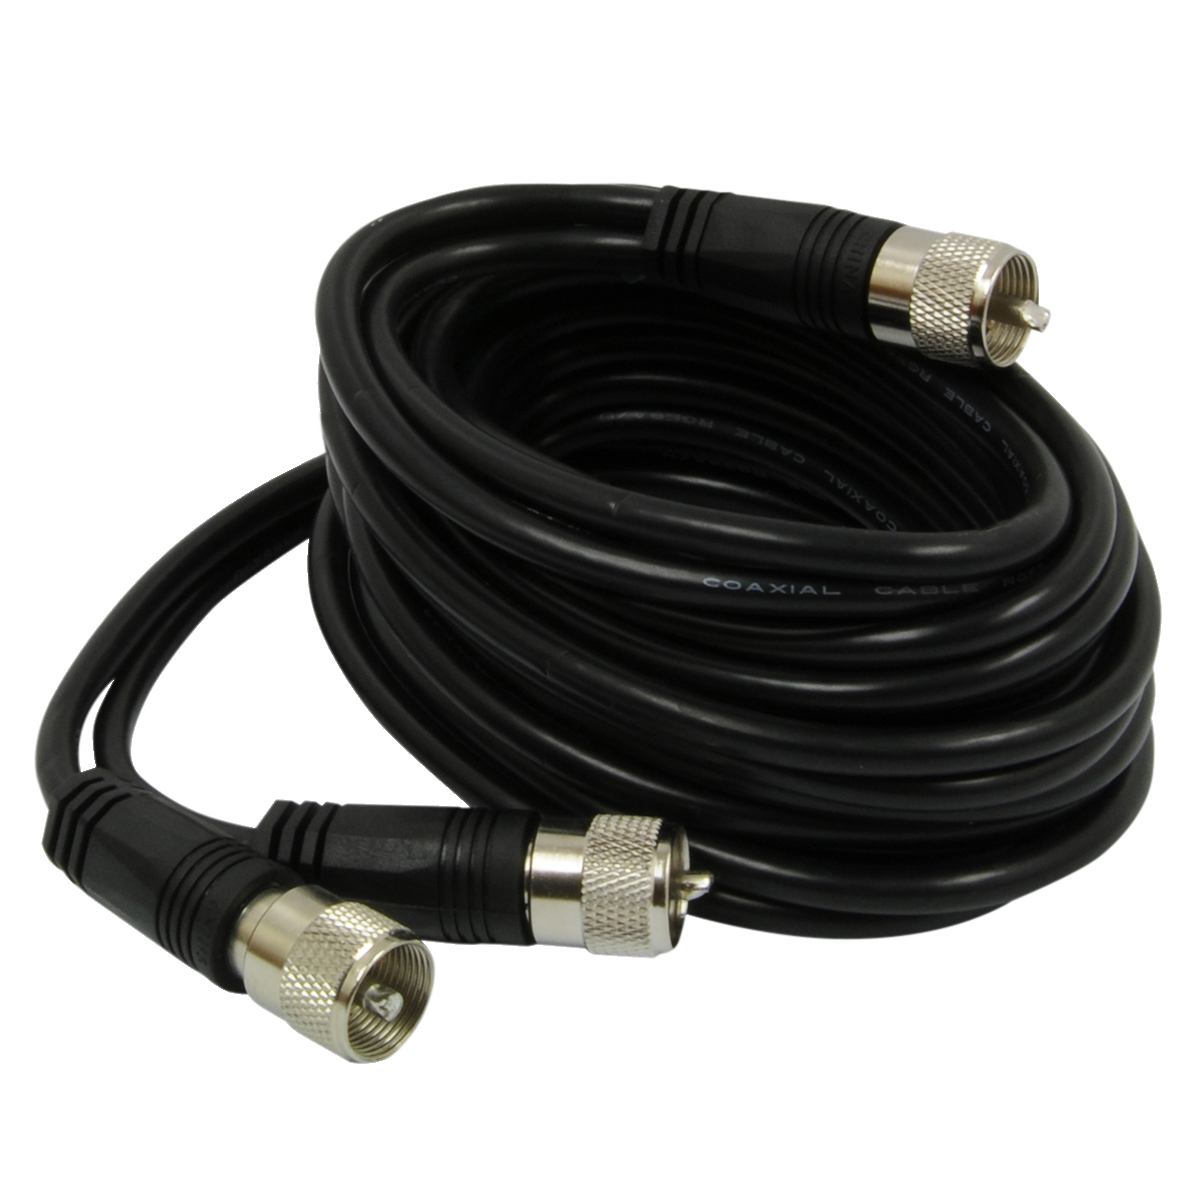 RoadPro 12' CB Antenna Co-Phase Coax Cable with (3) PL-259 Connectors